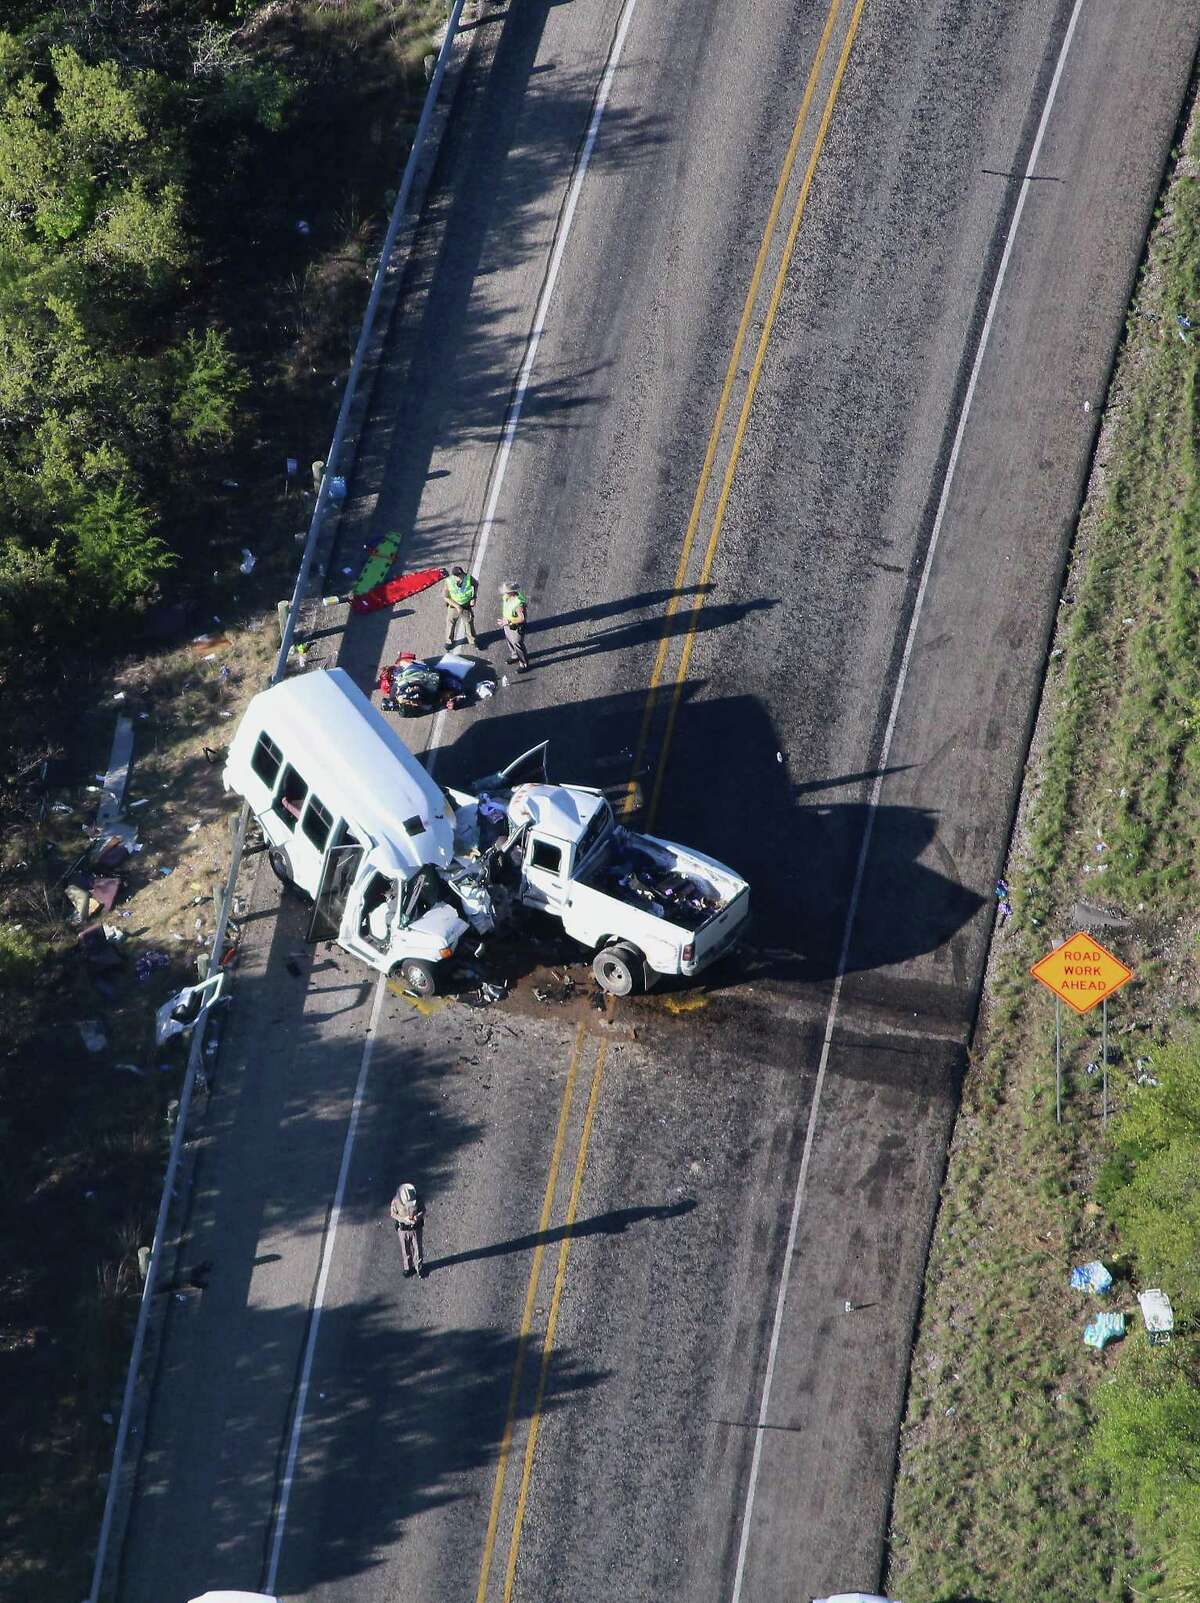 Investigators comb over the scene of an accident where 13 individuals were killed after a bus collided with a pickup truck head-on south of Garner State Park on Highway 83. The bus was carrying a group from the New Braunfels First Baptist Church who had been camping at the park. The driver of the truck, 20-year-old Jack Dillon Young, was air-lifted to a San Antonio hospital in stable condition. The NTSB is investigating the accident.